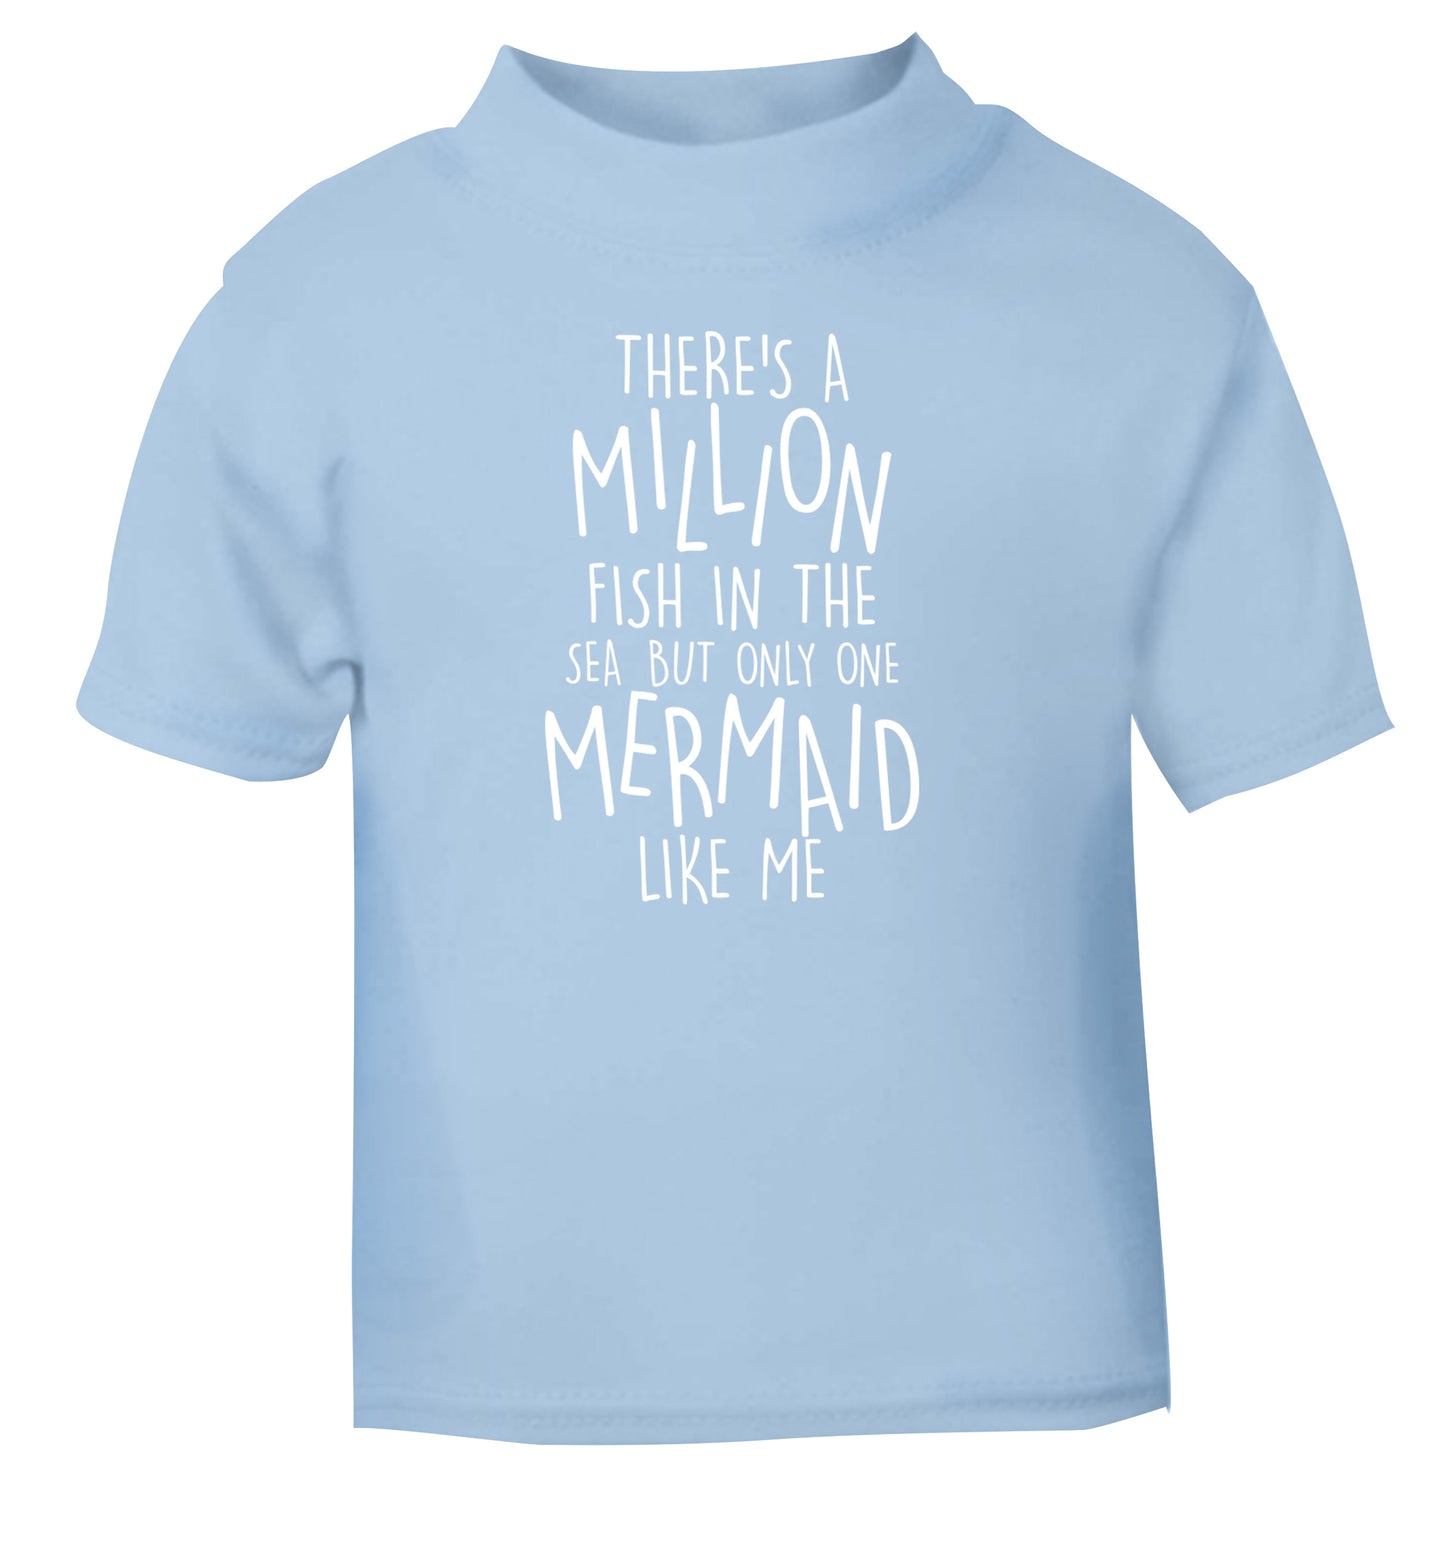 There's a million fish in the sea but only one mermaid like me light blue Baby Toddler Tshirt 2 Years